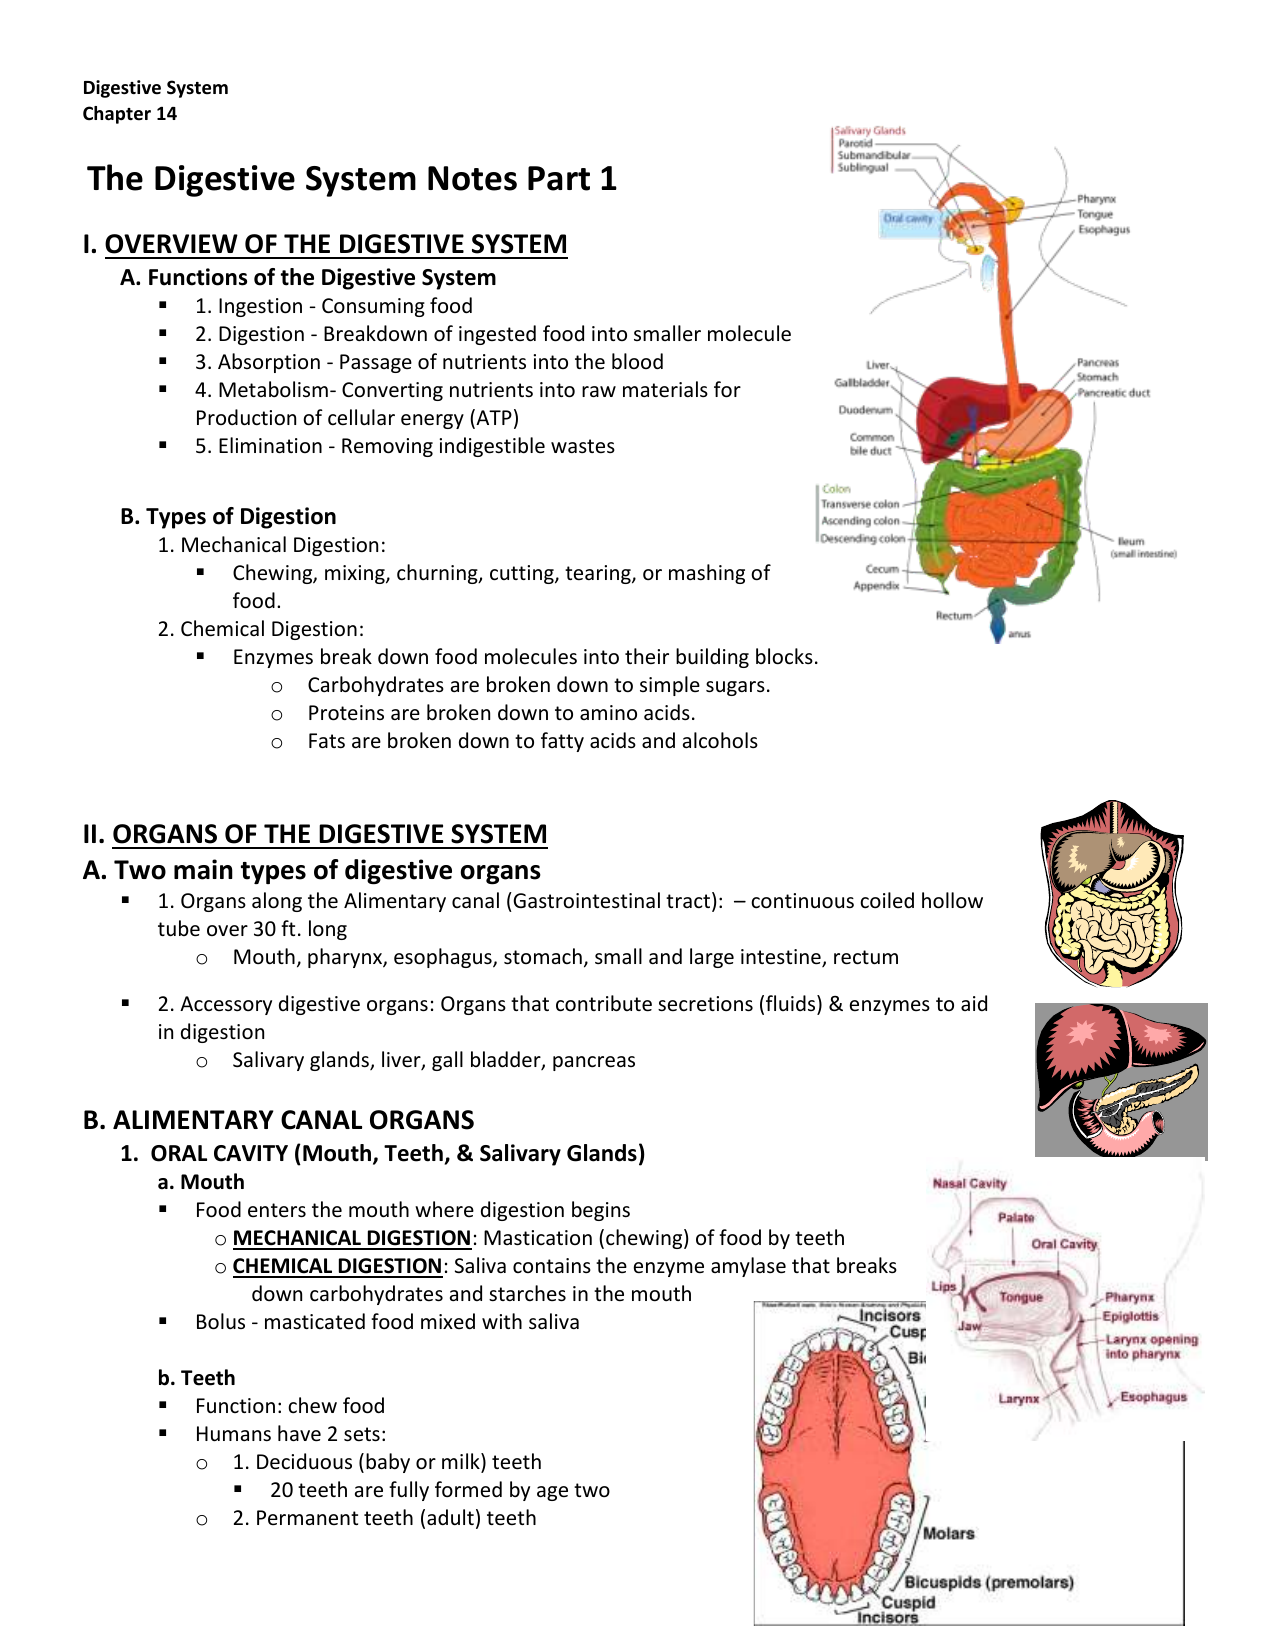 assignment for digestive system